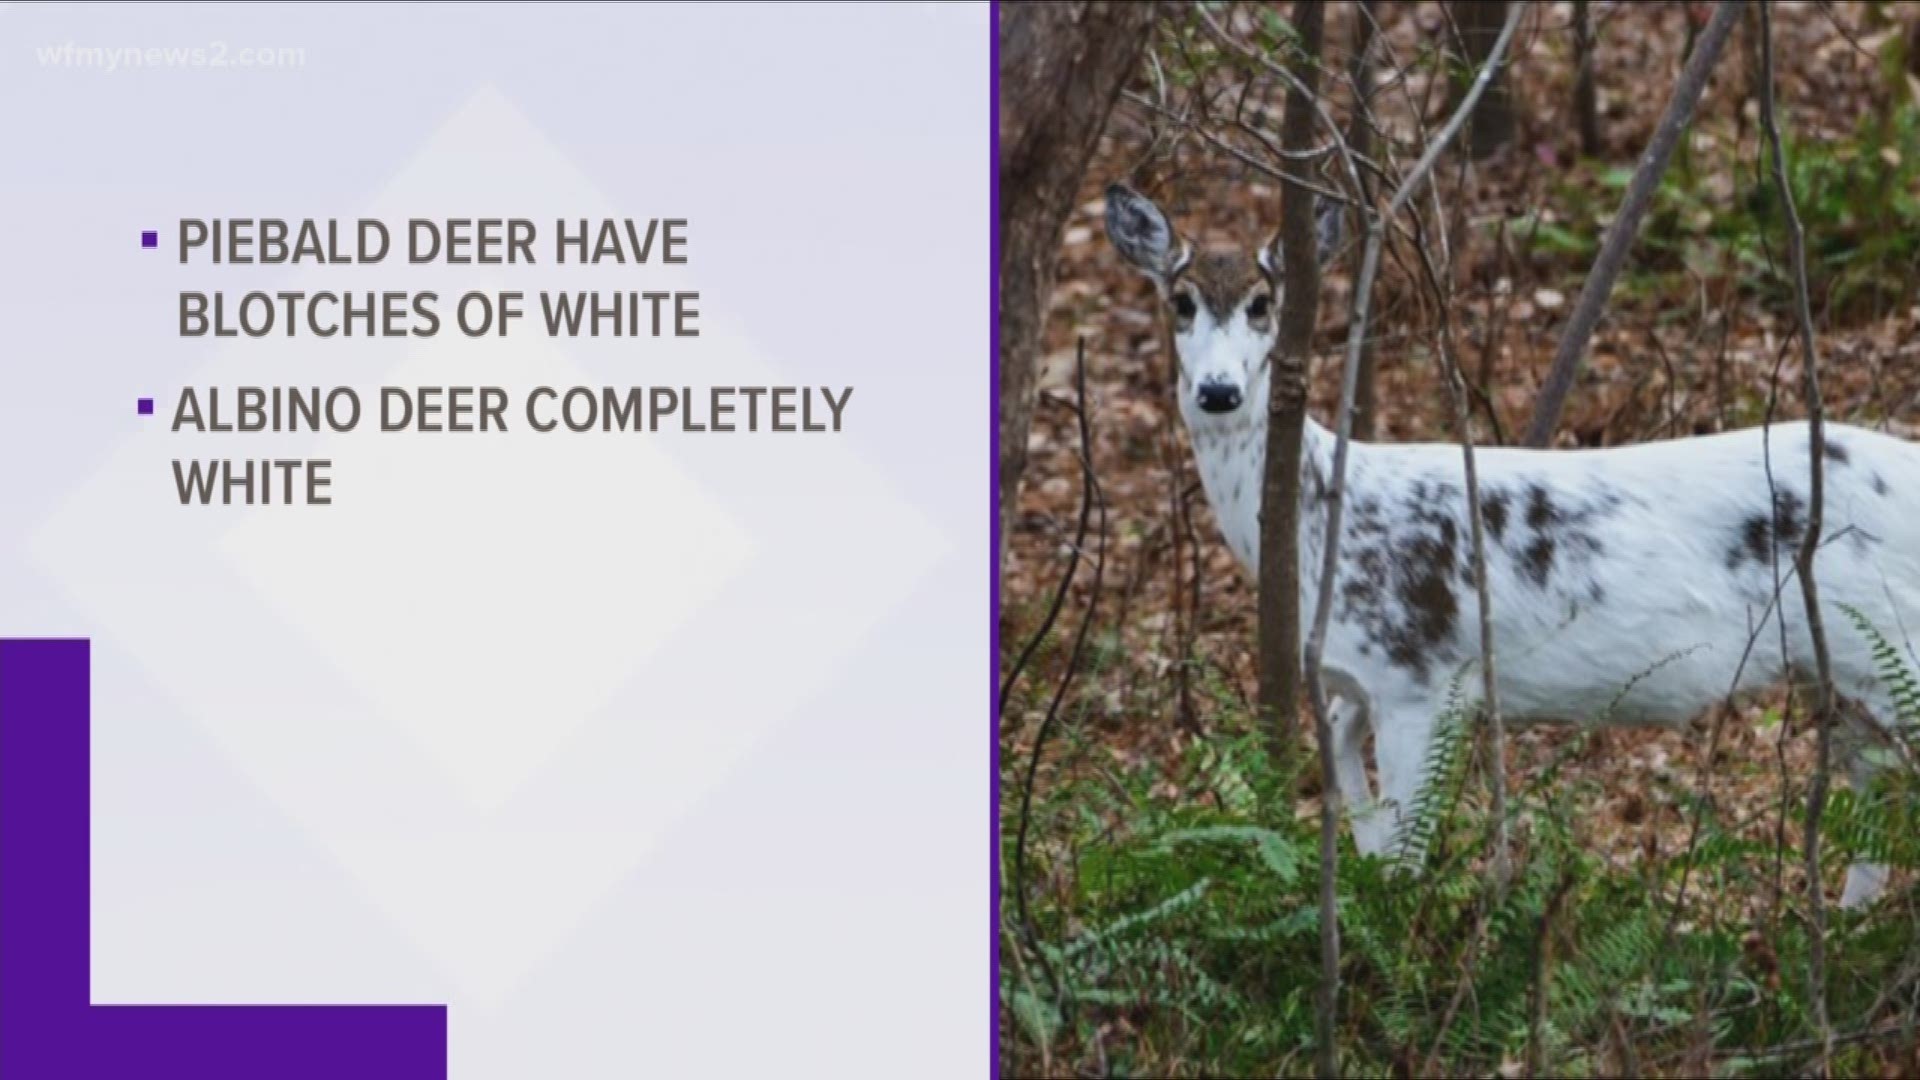 Gary Frazier spotted a rare piebald deer standing in a wooded area and quickly snapped some photos.